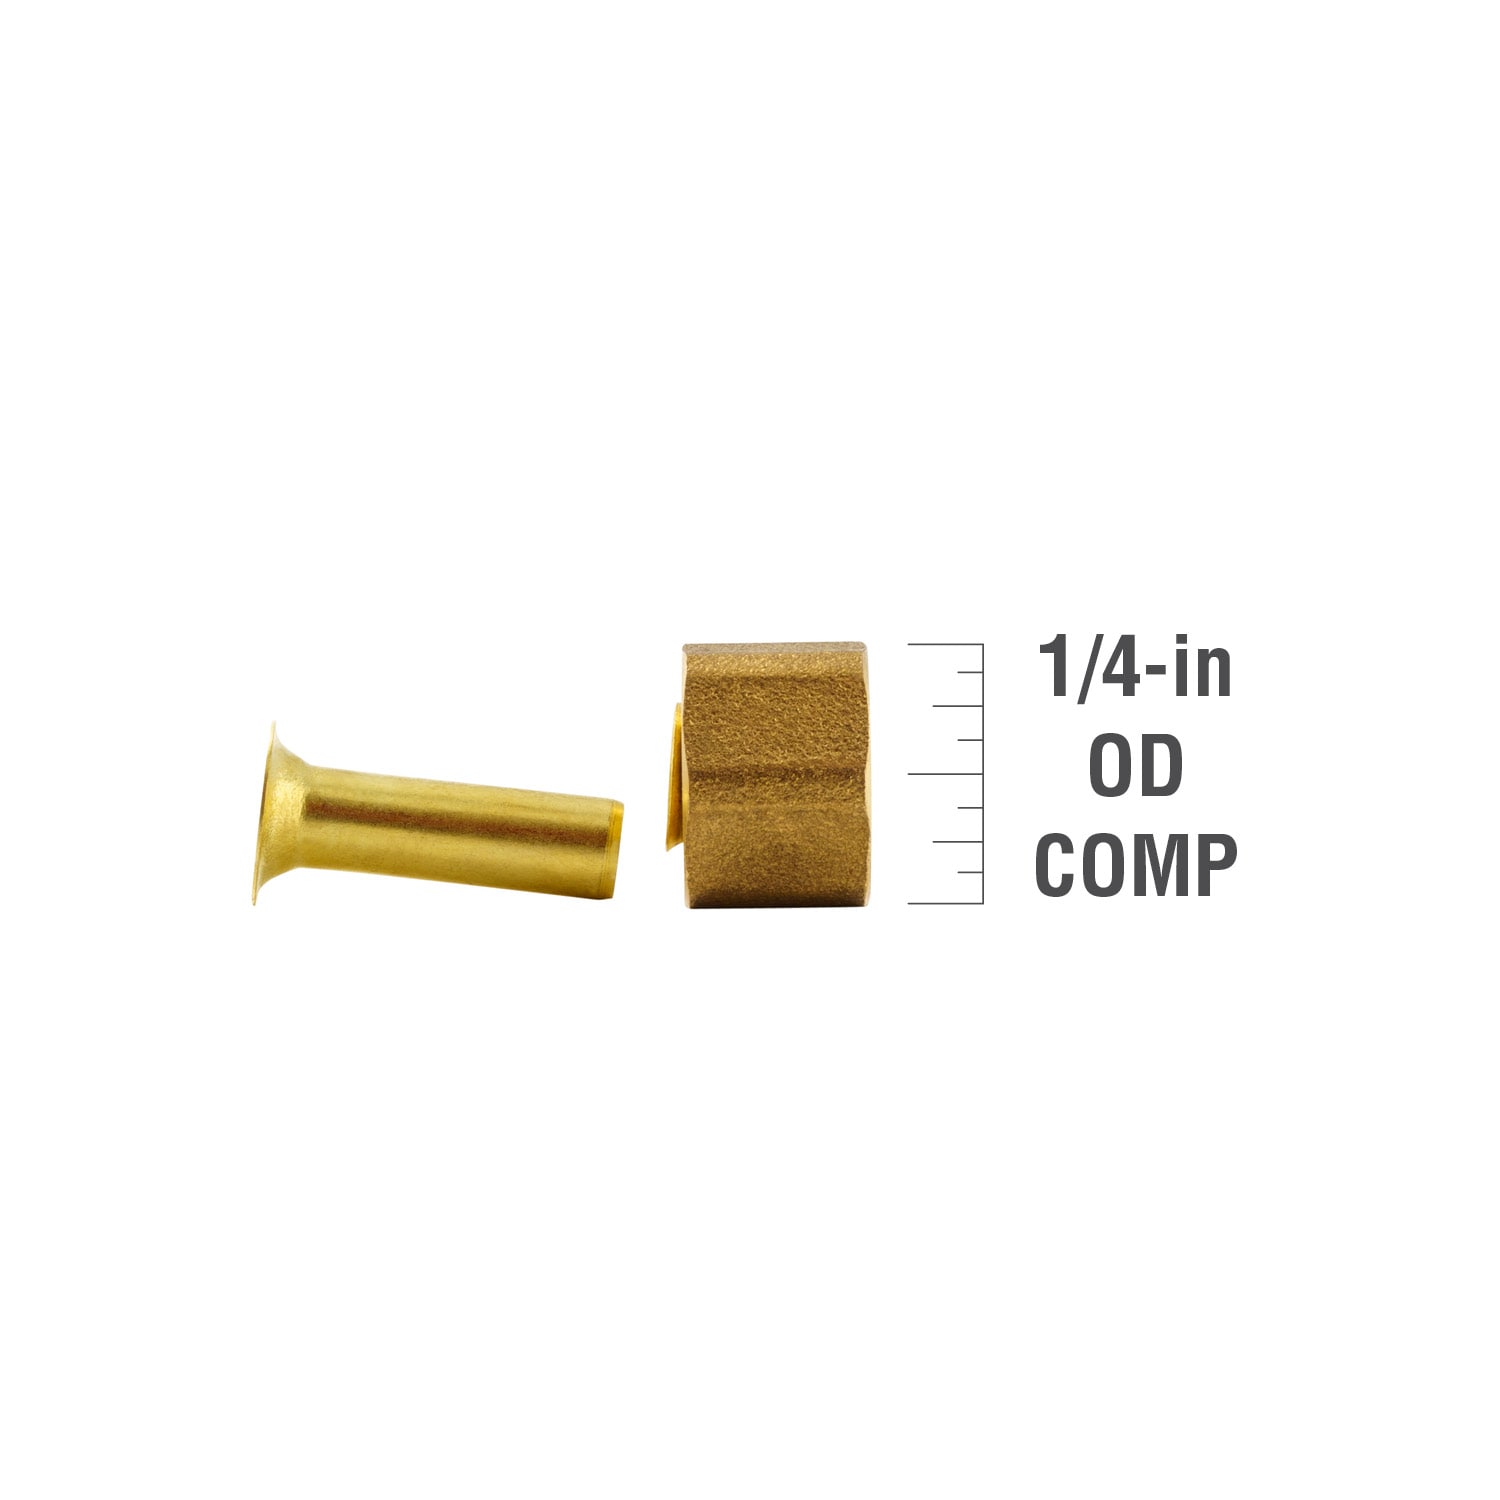  DIAL TV120504 1/4 Compression Nut/Sleeve (2 Pack) : Industrial  & Scientific